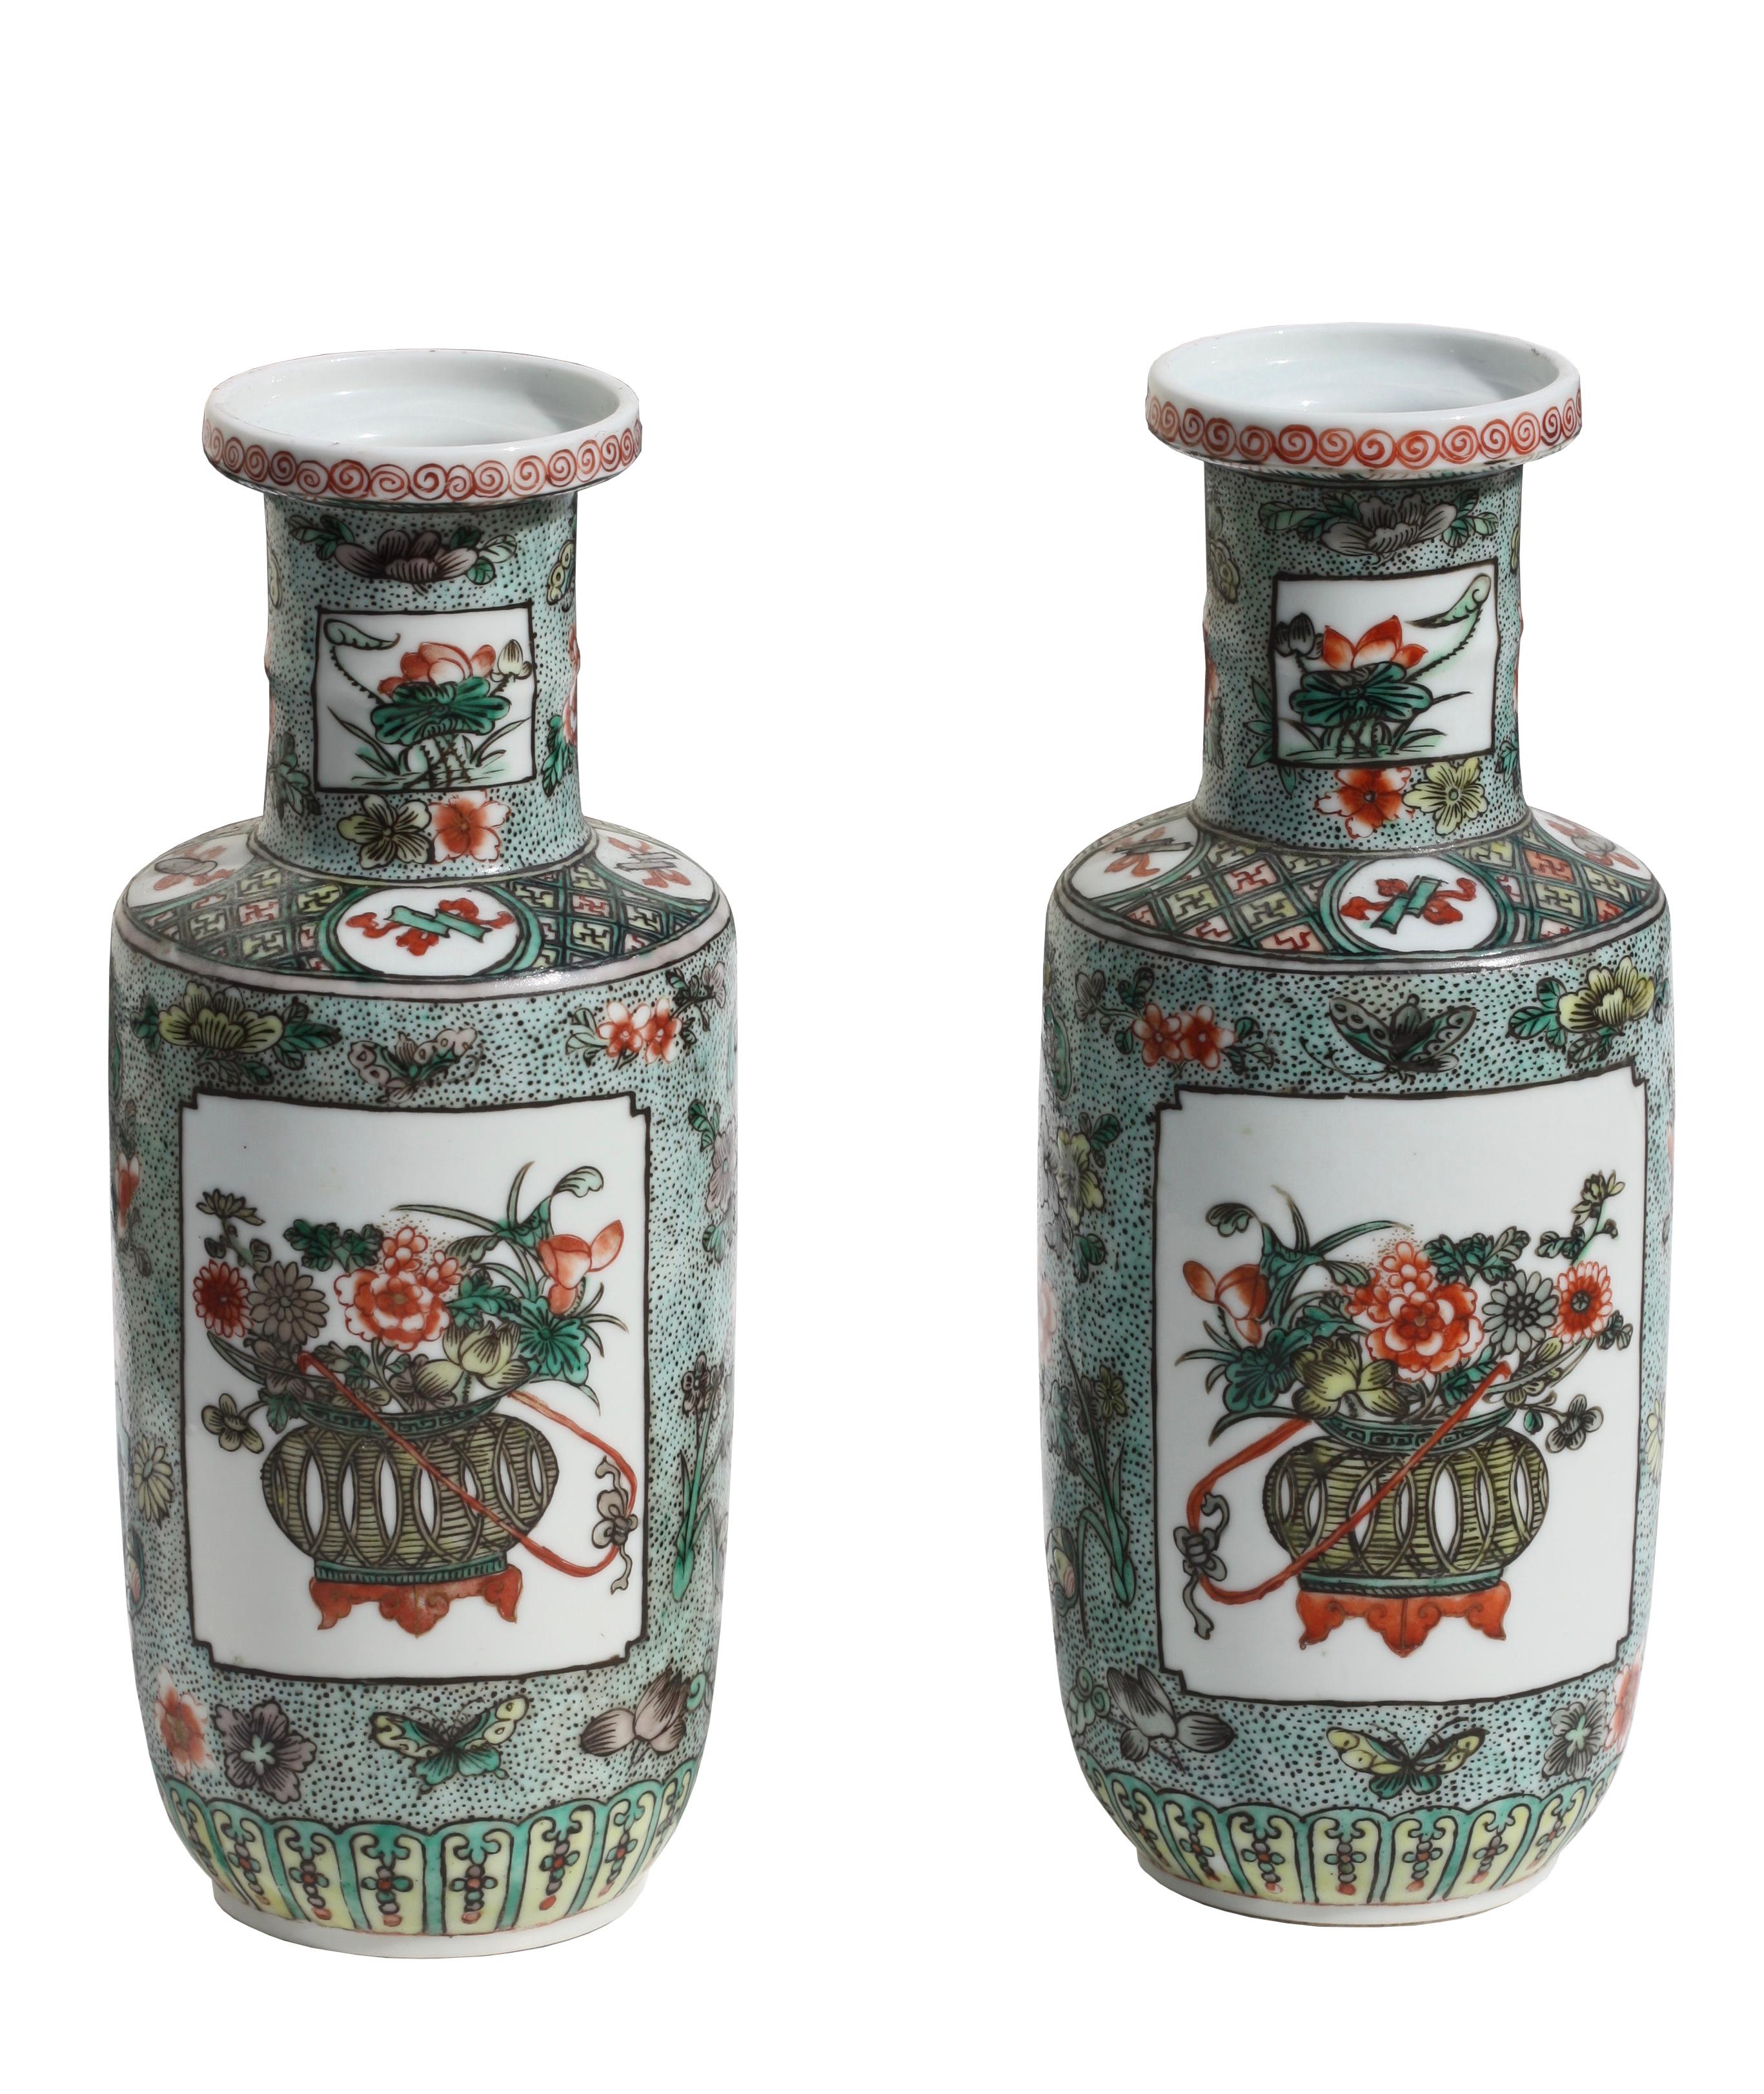 A pair of Chinese famille verte porcelain vases
19th century 
Of rouleau form, painted with reserves of flower baskets.
Height 9.75 in. (24.76 cm.) 
Provenance: Estate of Laura Speiser, NY.